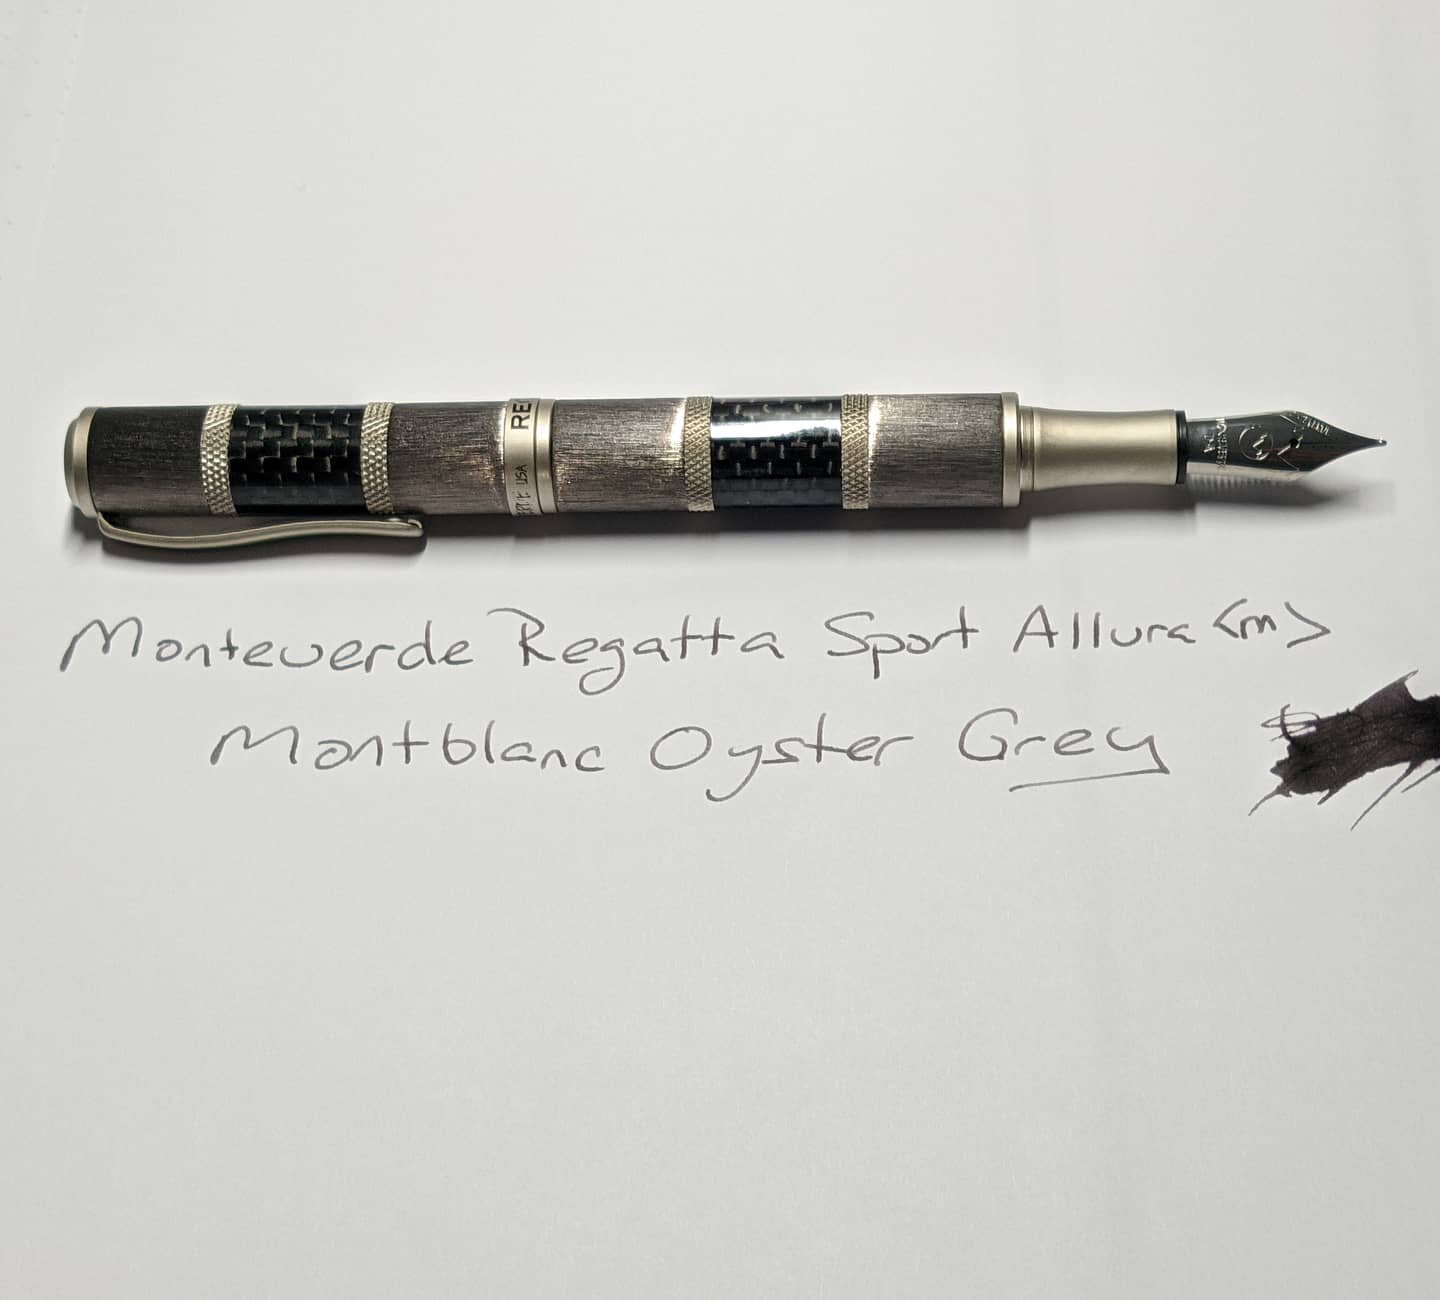 I'm really loving this combo: Monteverde Regatta Sport Allura inked up with Montblanc Oyster Grey. 
#fountainpen